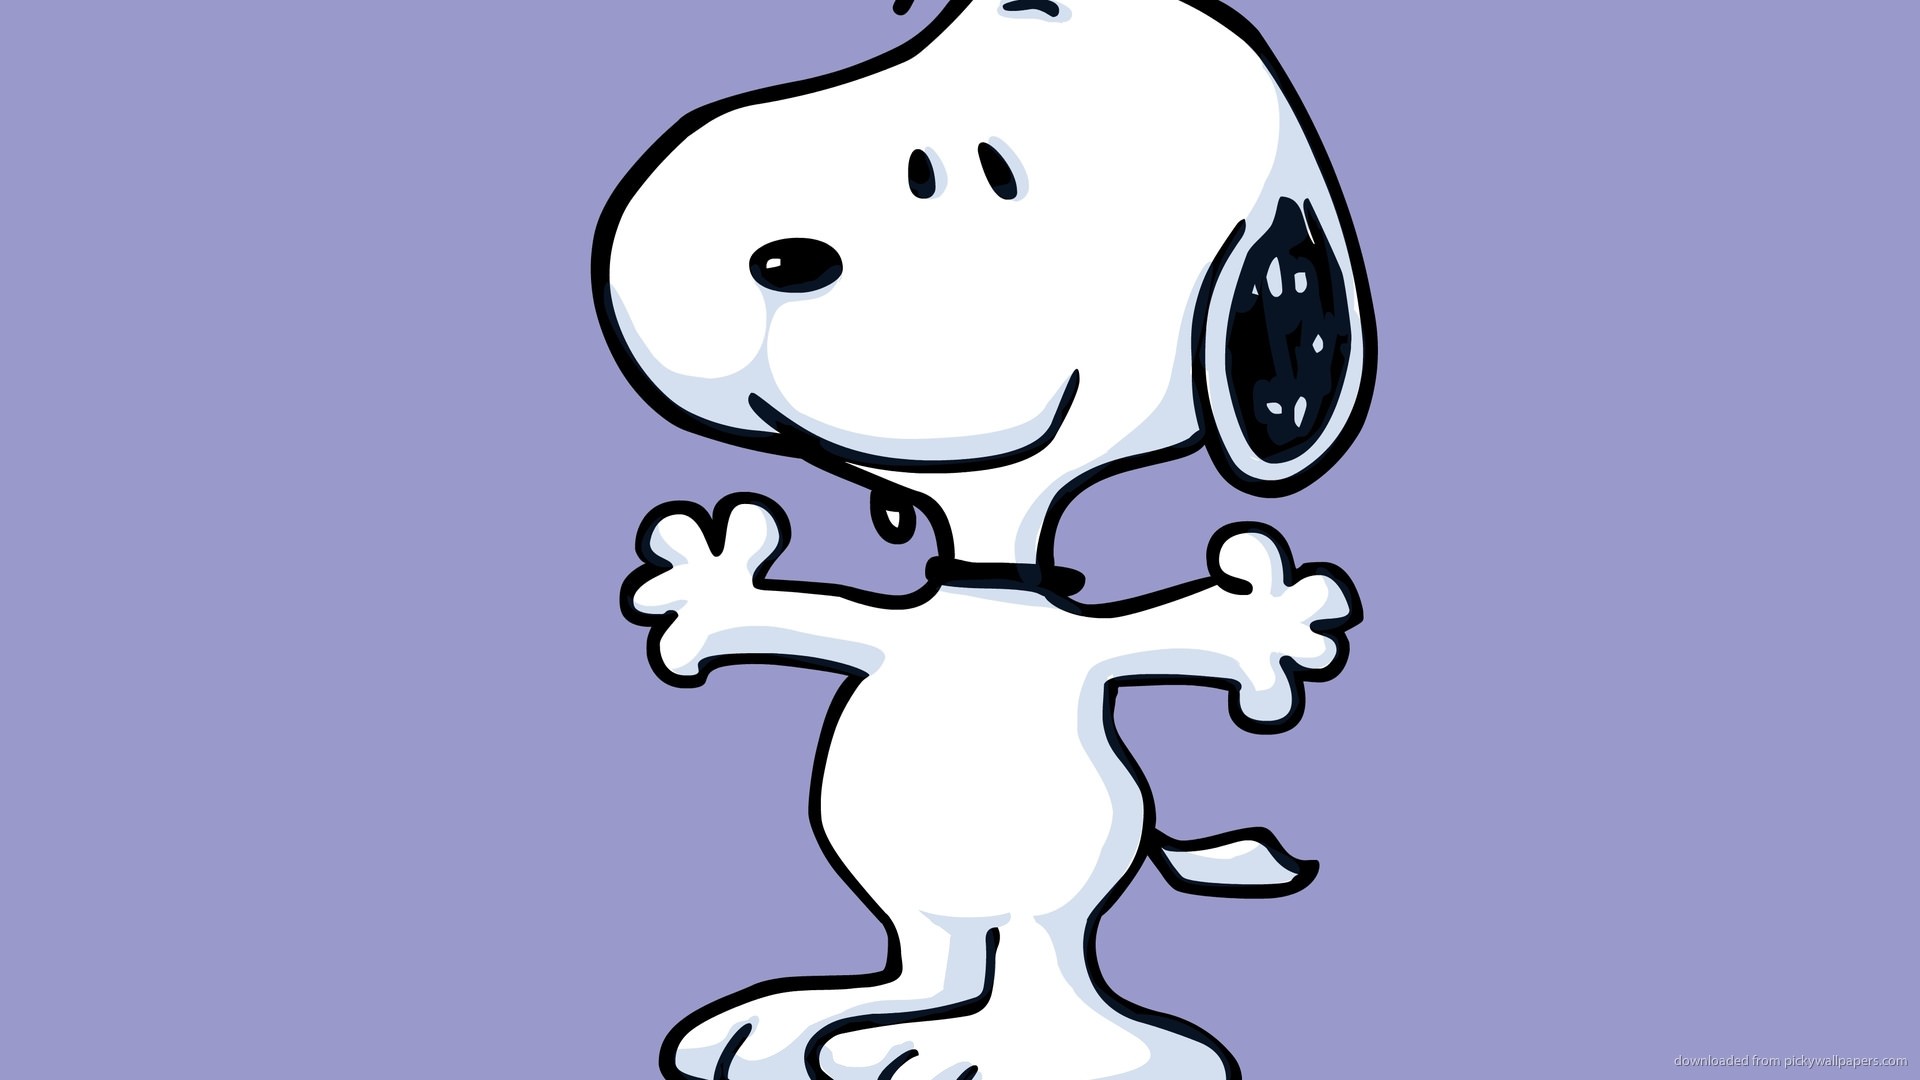 Q8rjhx7 Free Snoopy Wallpaper For Ipad Px Desktop Wallpaper Snoopy Background 259 Hd Wallpaper Backgrounds Download